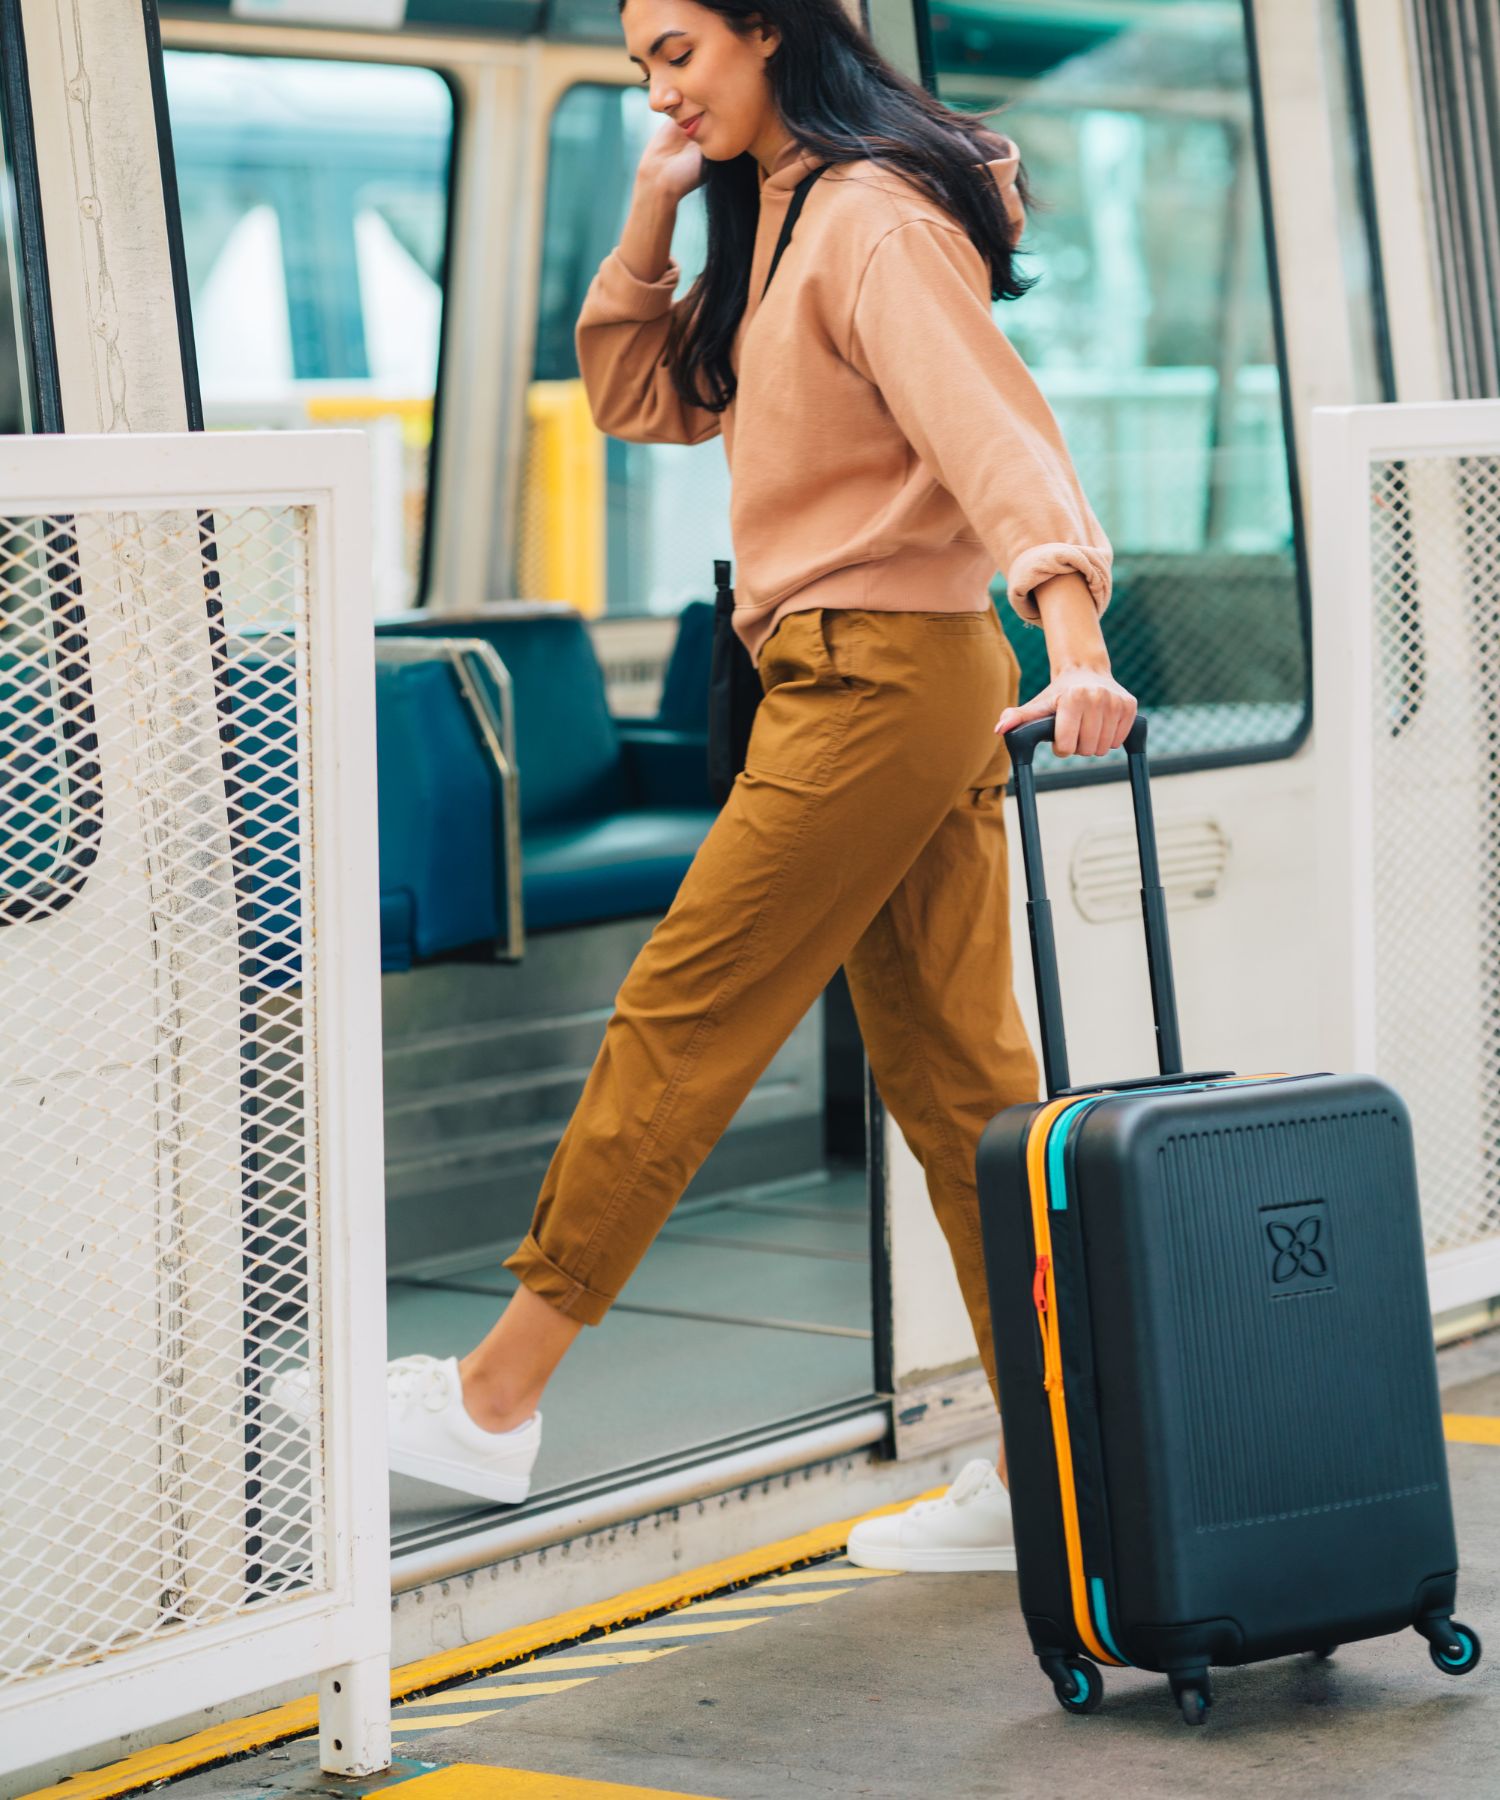 The Best Luggage for Travel: Every Suitcase, Overnight Bag, and